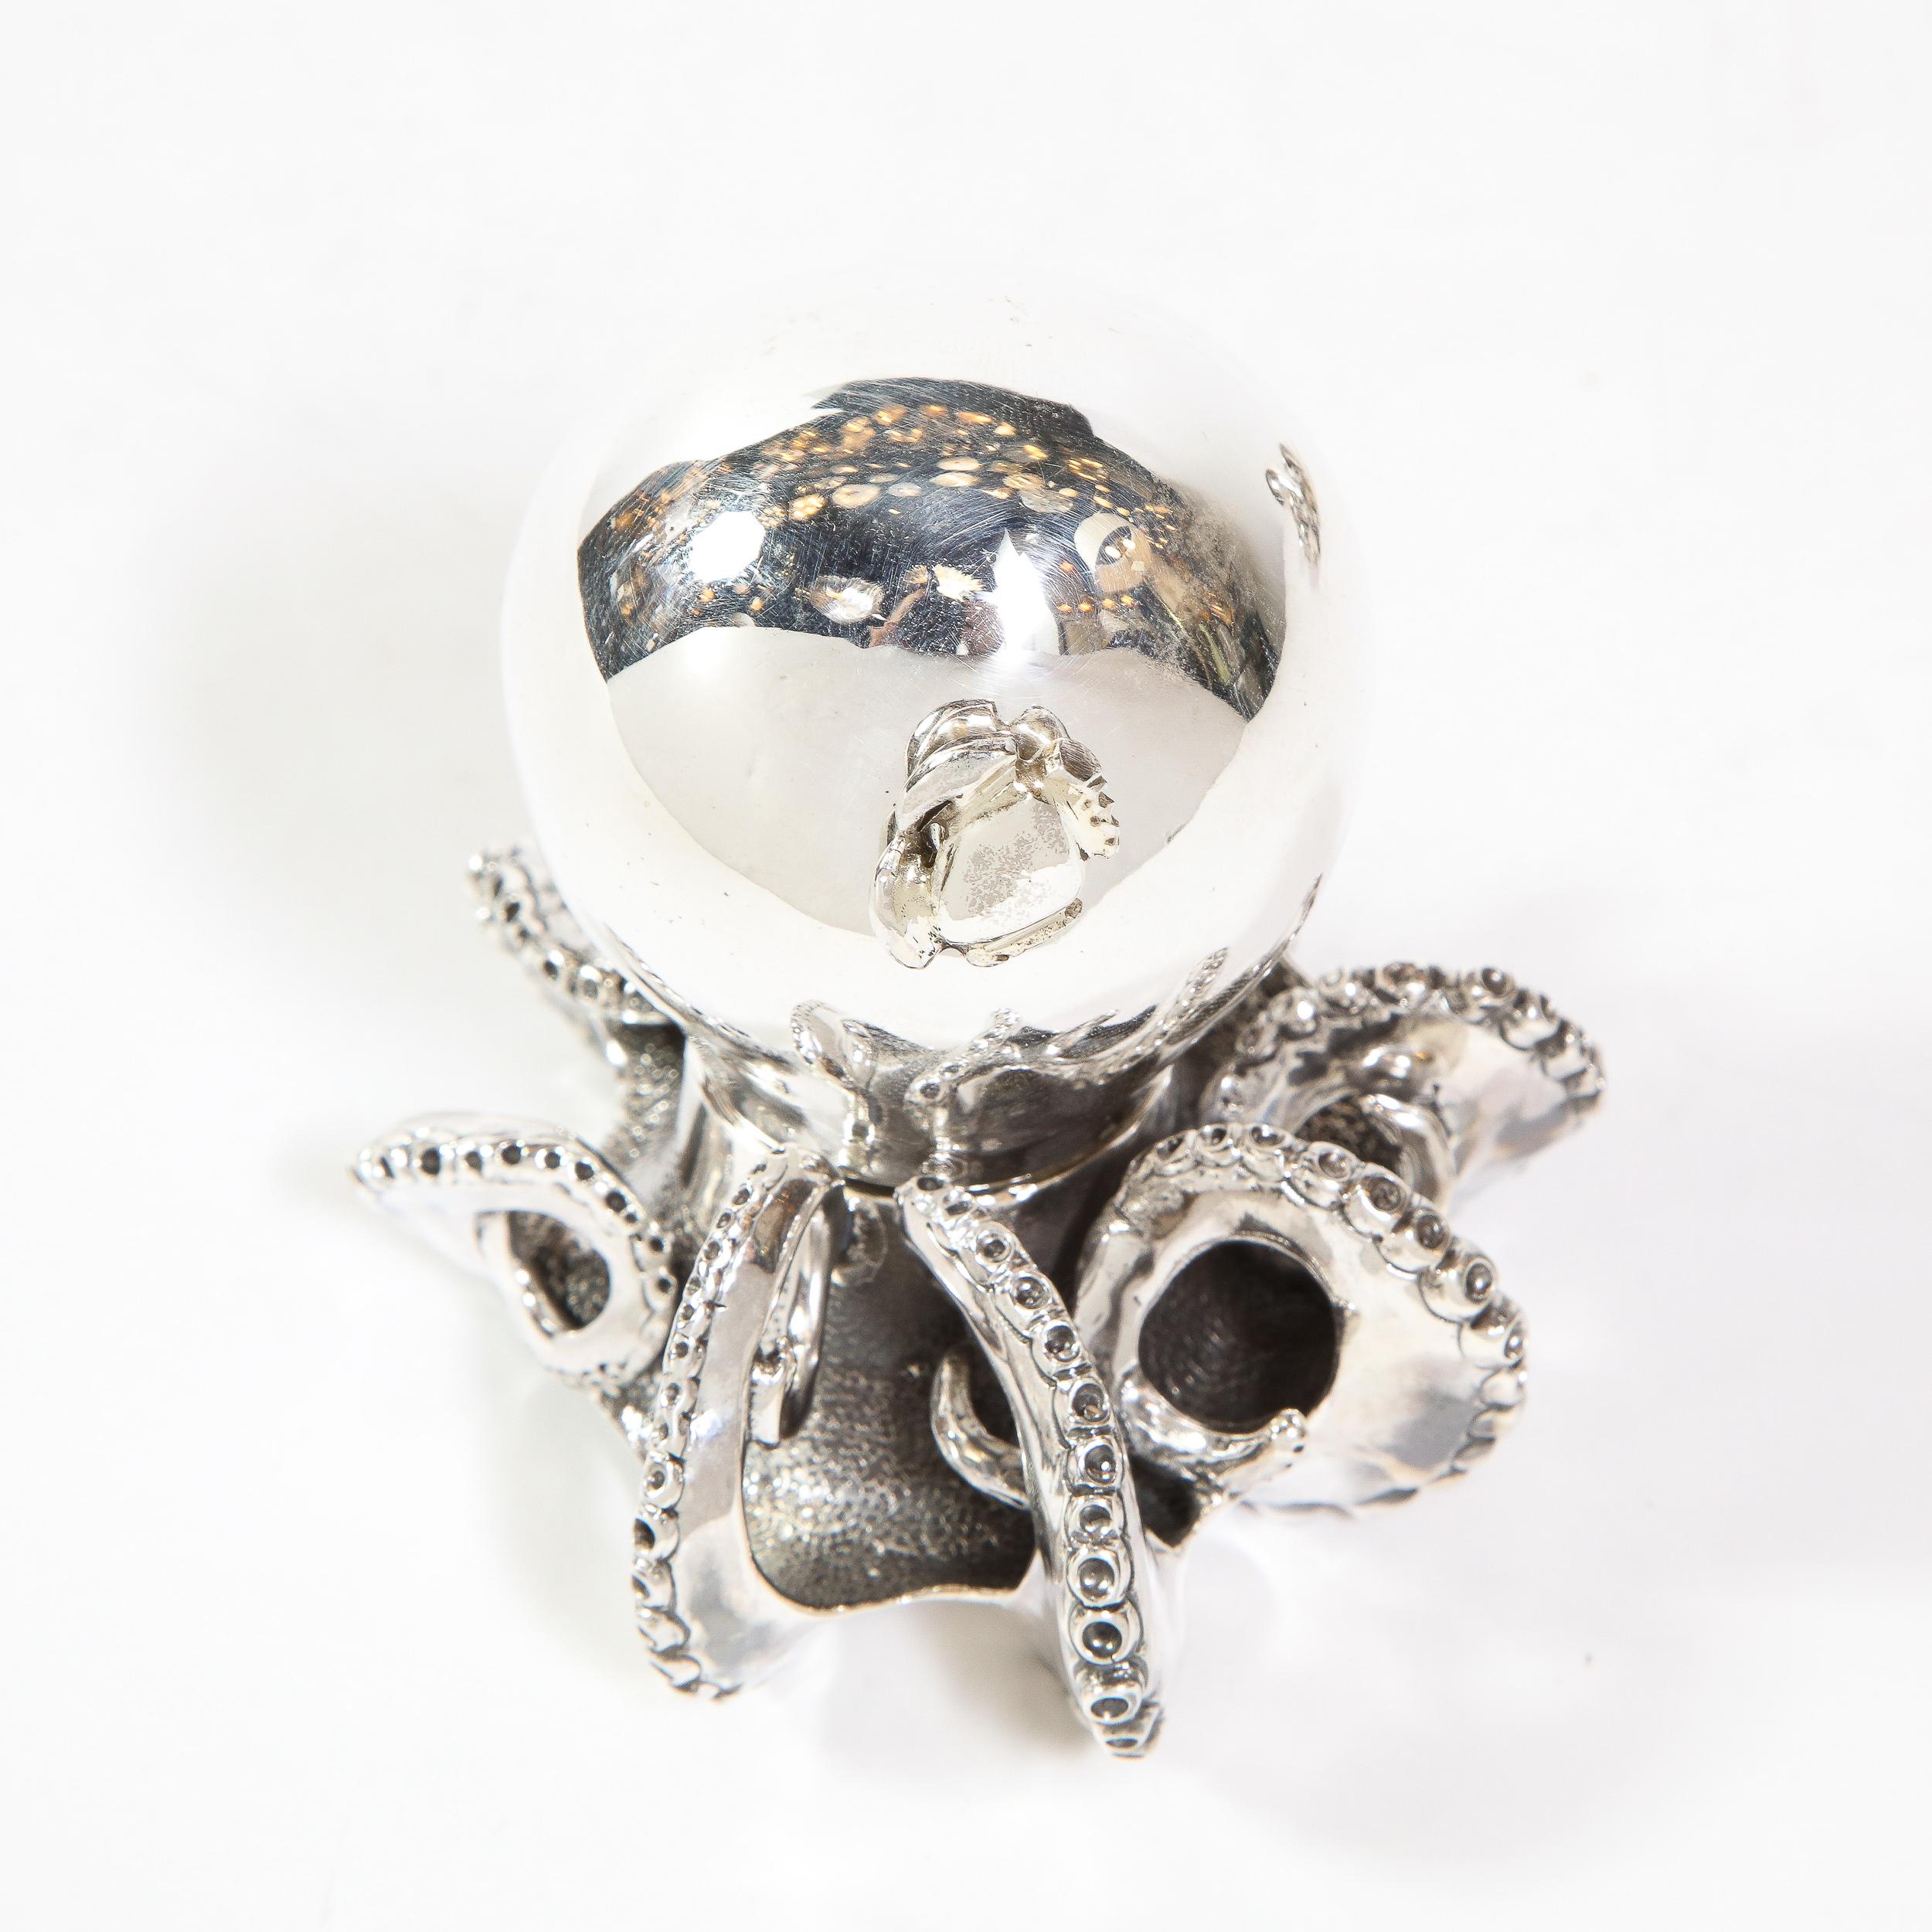 Handcrafted Sterling Silver Octopus Salt Shaker and Pepper Mill by Missiaglia 8